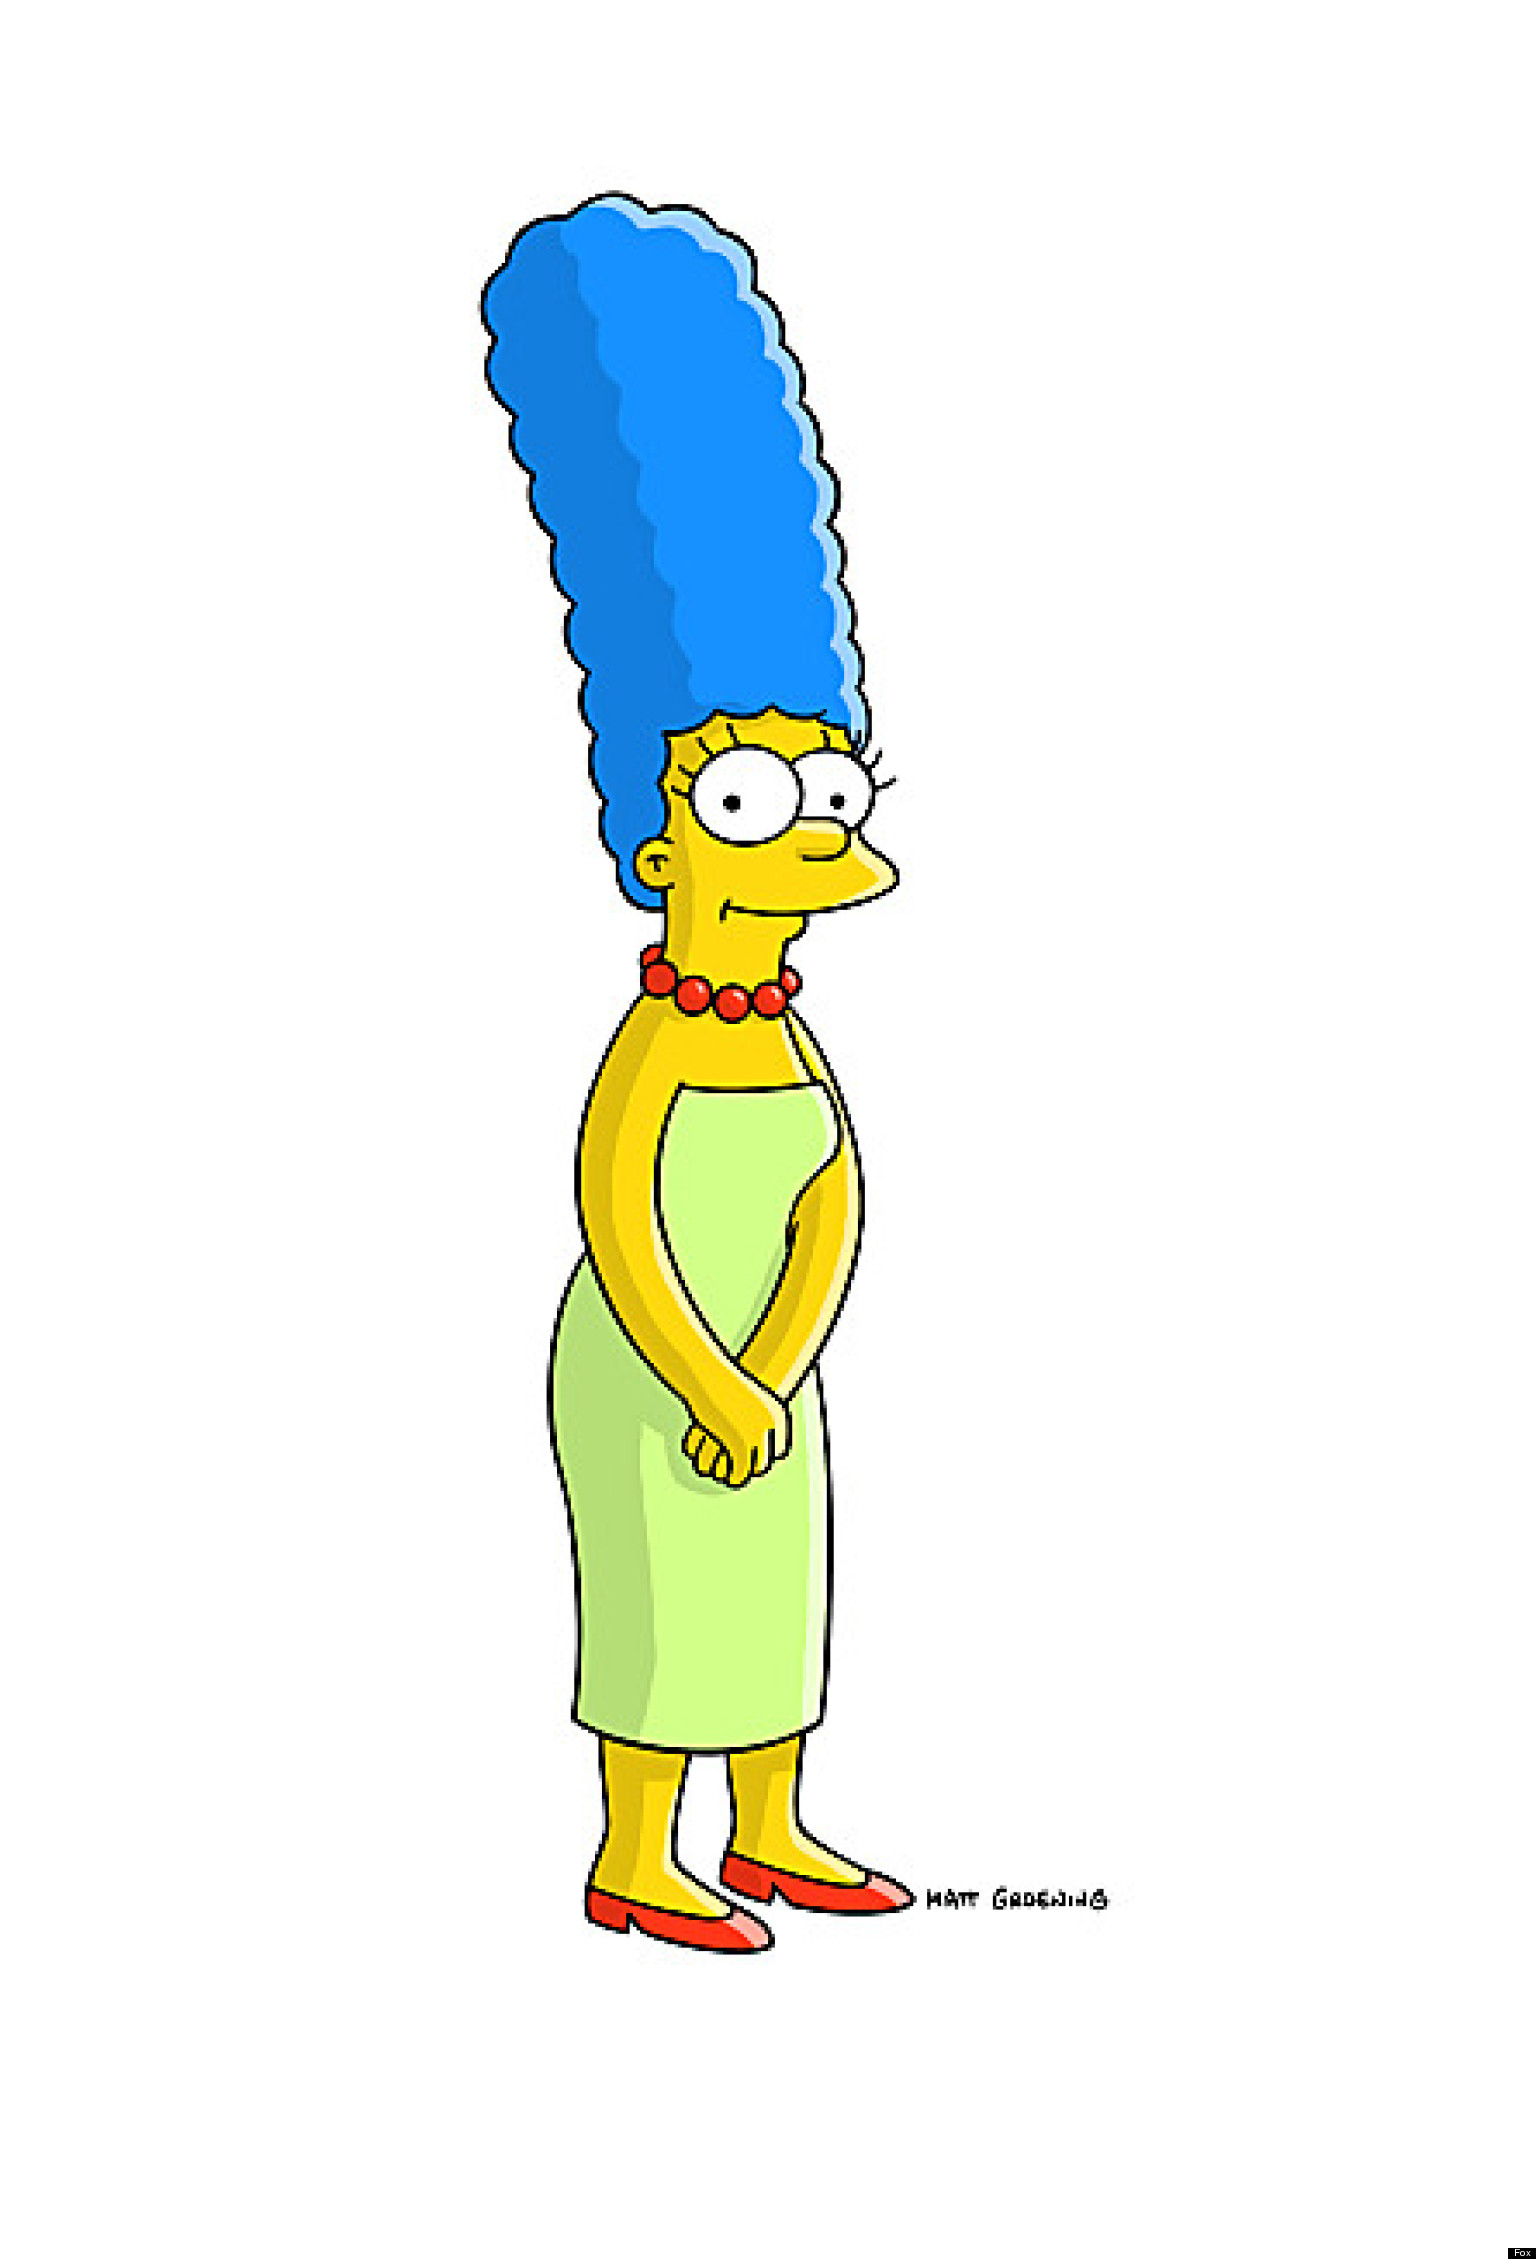 The Simpsons Marge Simpson Minecraft Skin